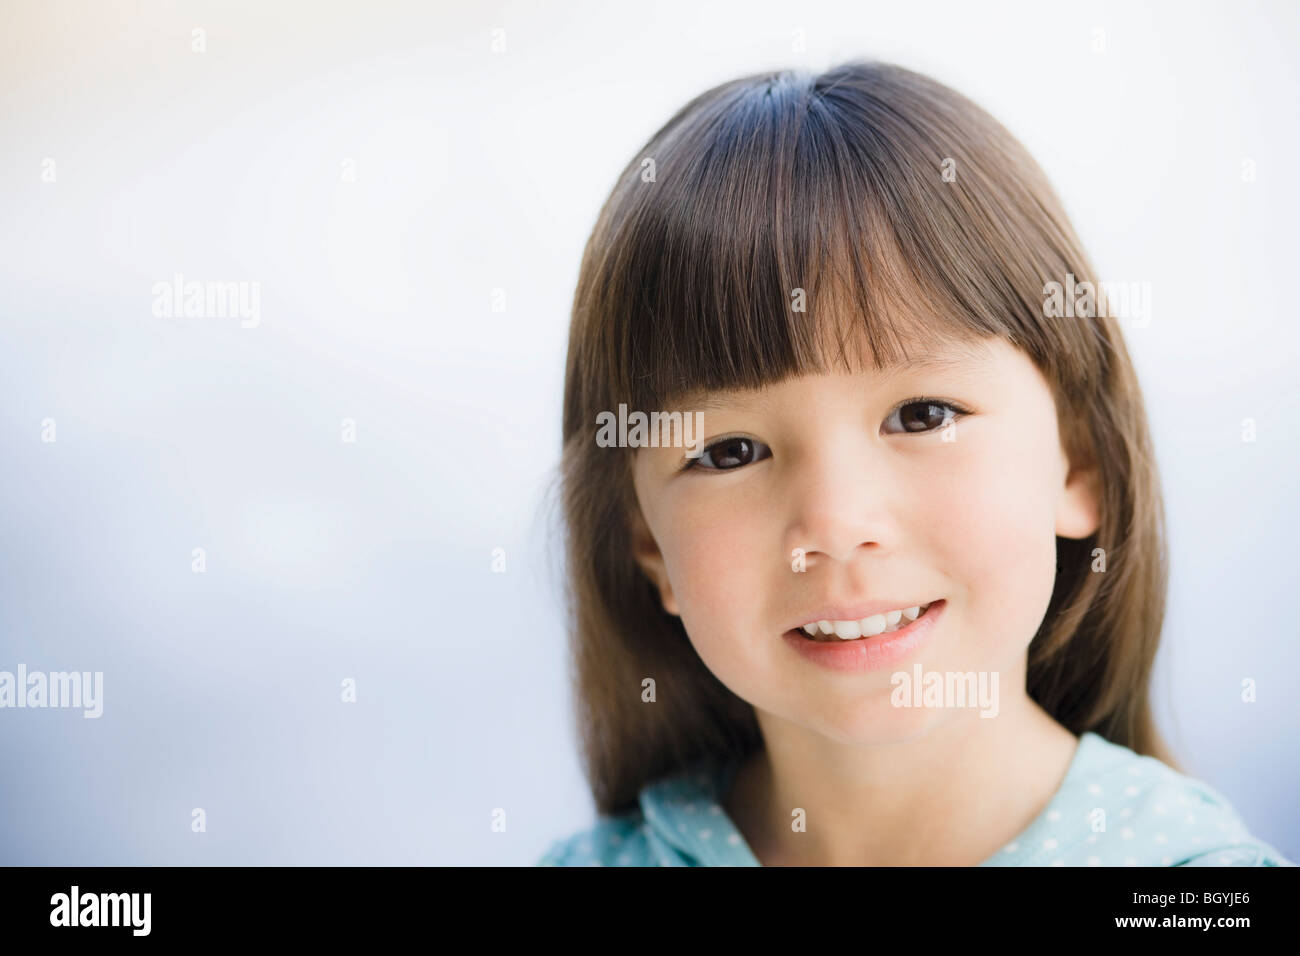 Portrait of young girl Stock Photo